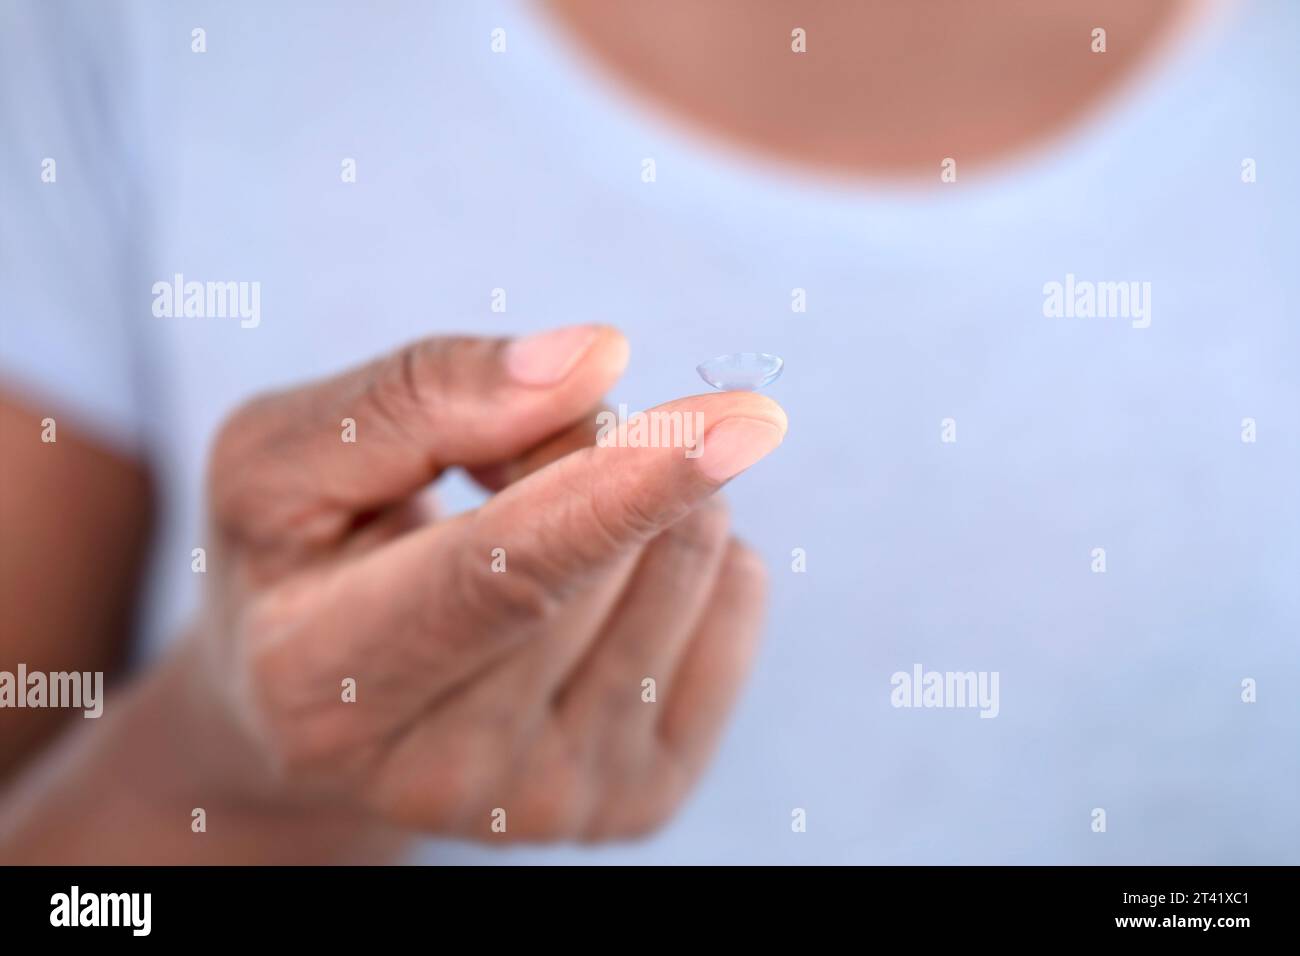 Contact lens on woman's finger Stock Photo